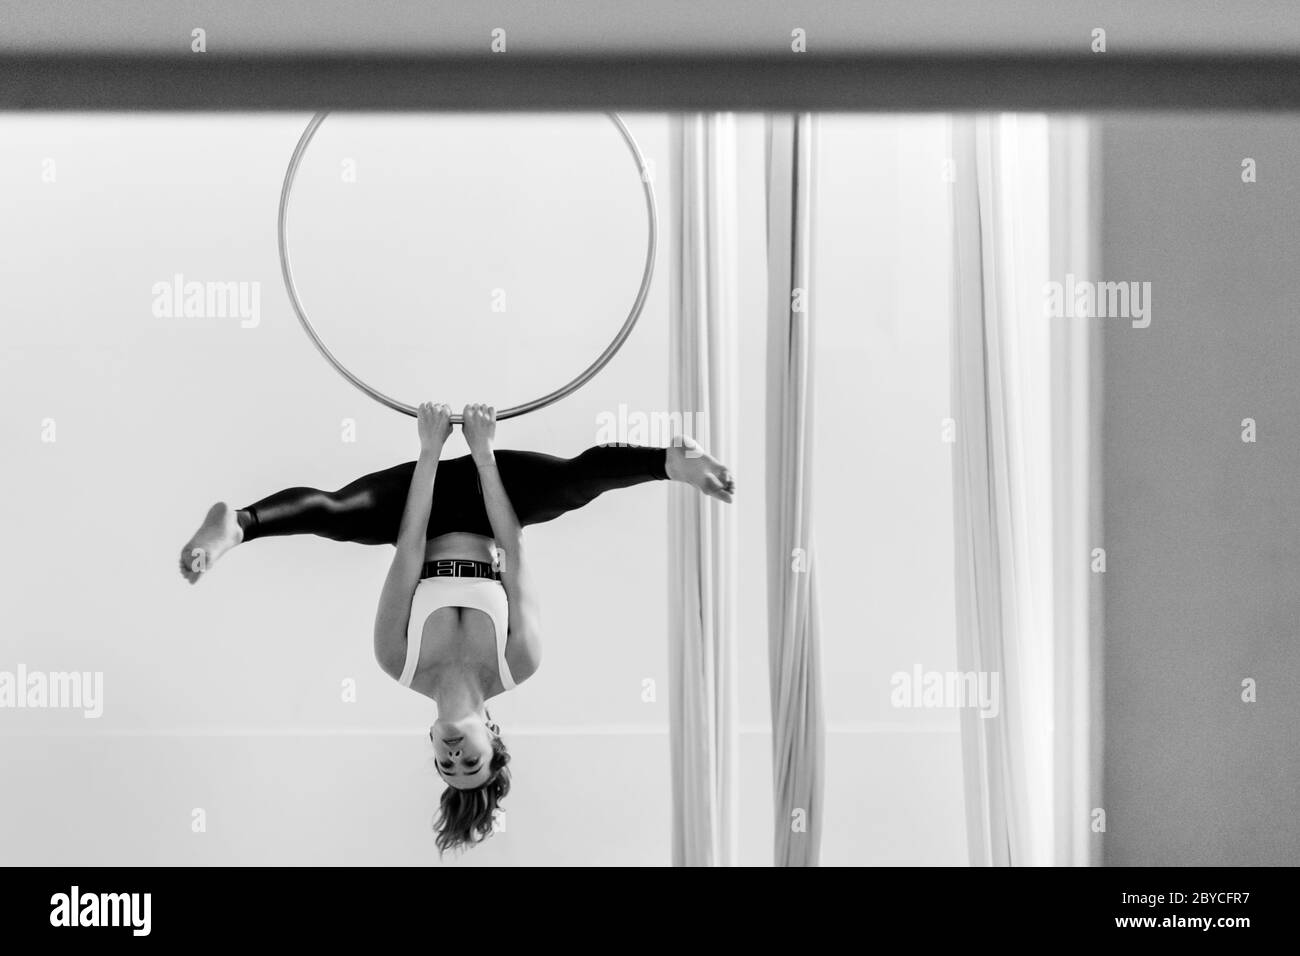 A Colombian aerial dancer performs on aerial hoop during a training session in a gym in Medellín, Colombia. Stock Photo